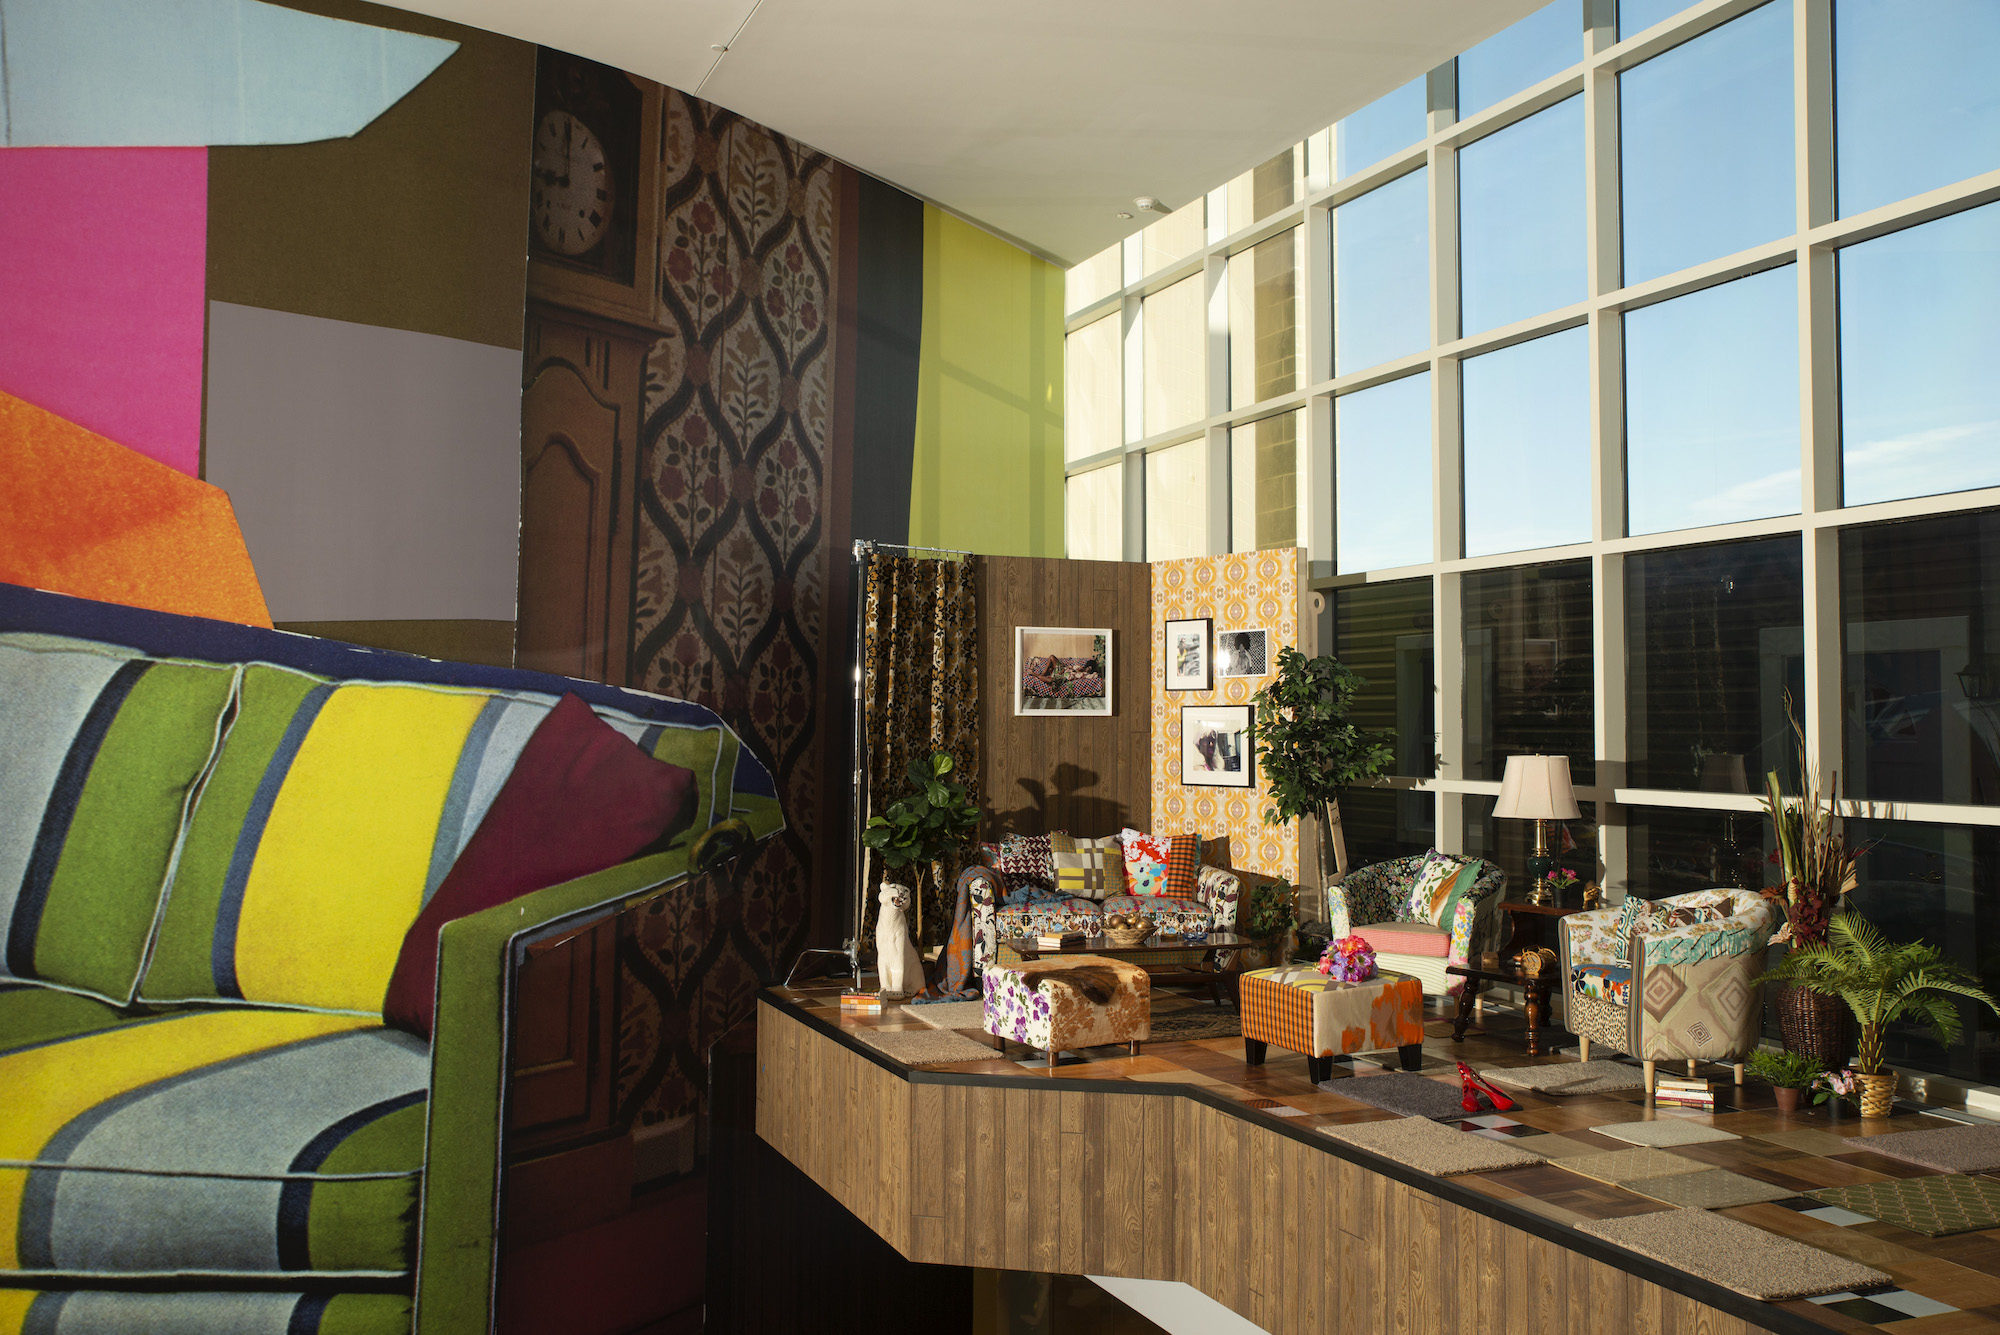 Installation view of Mickalene Thomas: A Moment’s Pleasure at the Baltimore Museum of Art